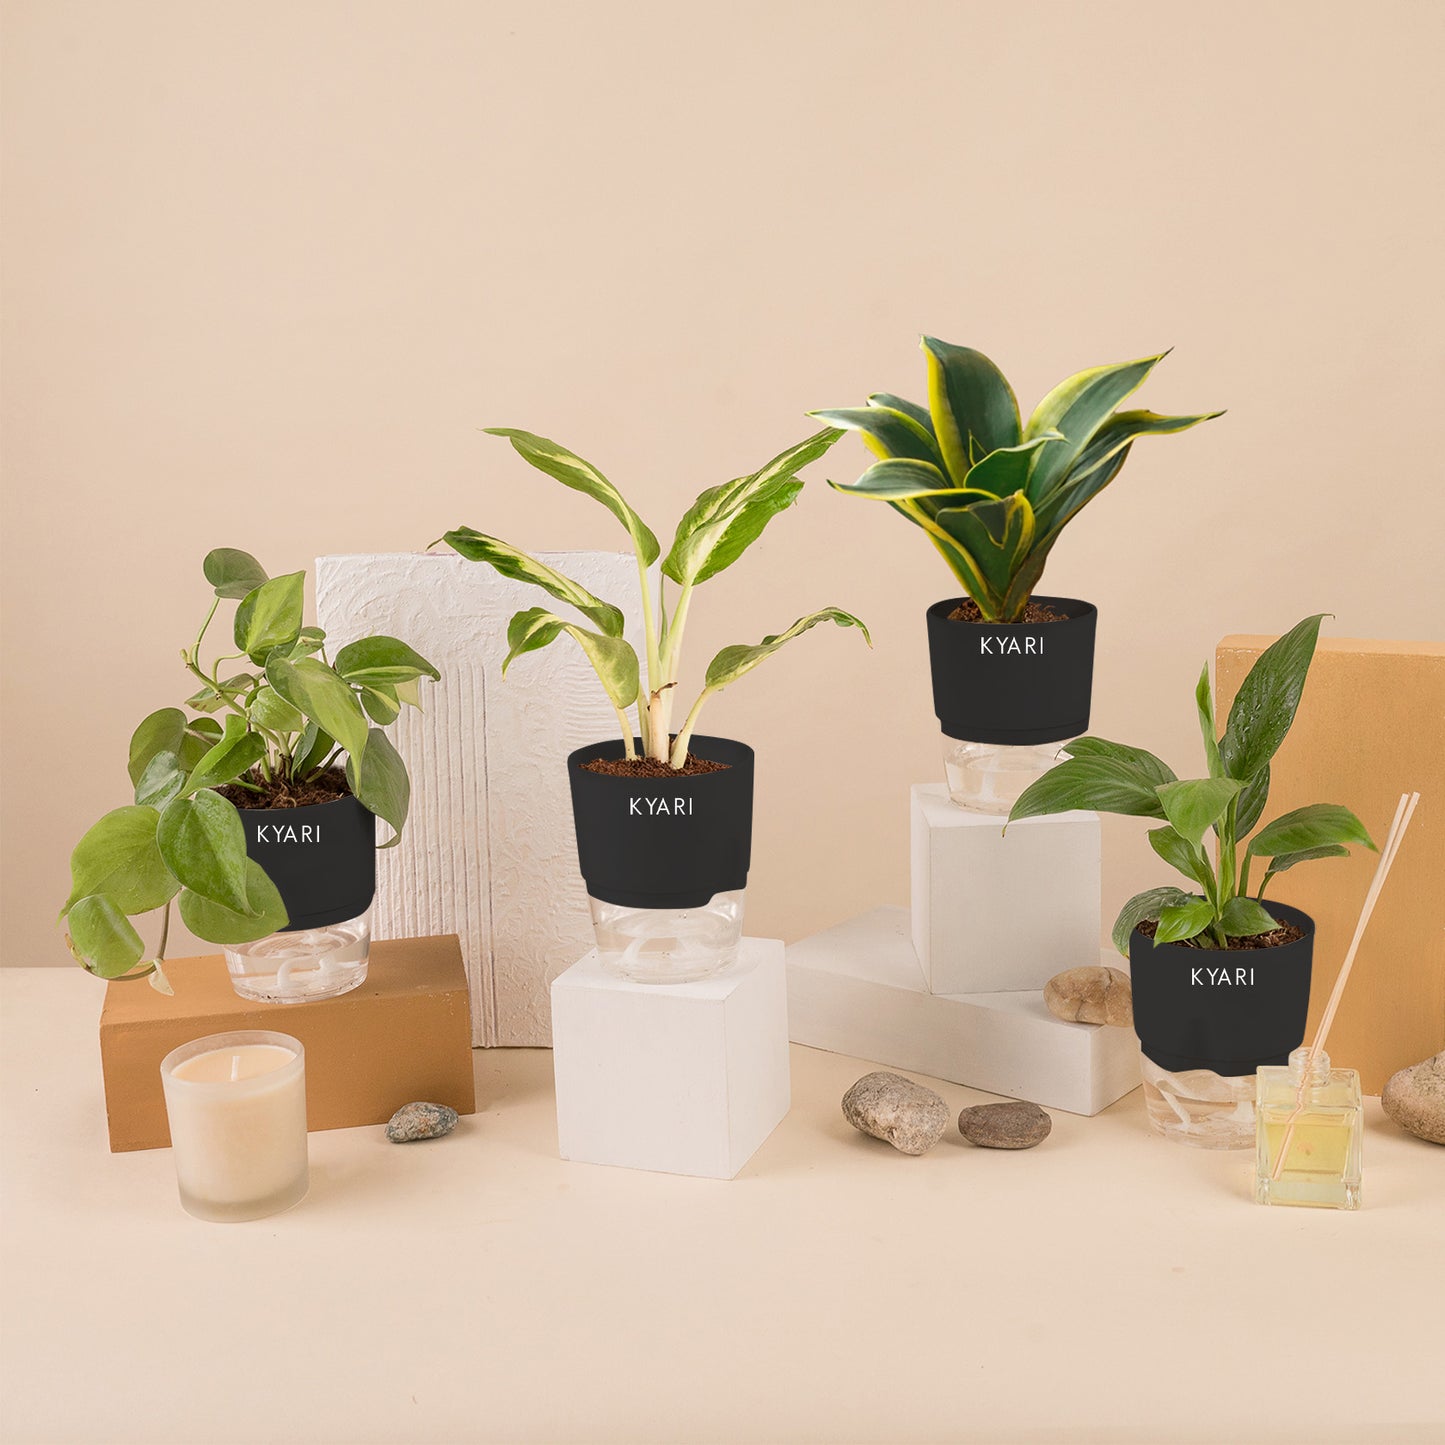 Set of 4 - Peace Lily & Money variegated & Dieffenbachia & Golden Hahnii Snake Plant